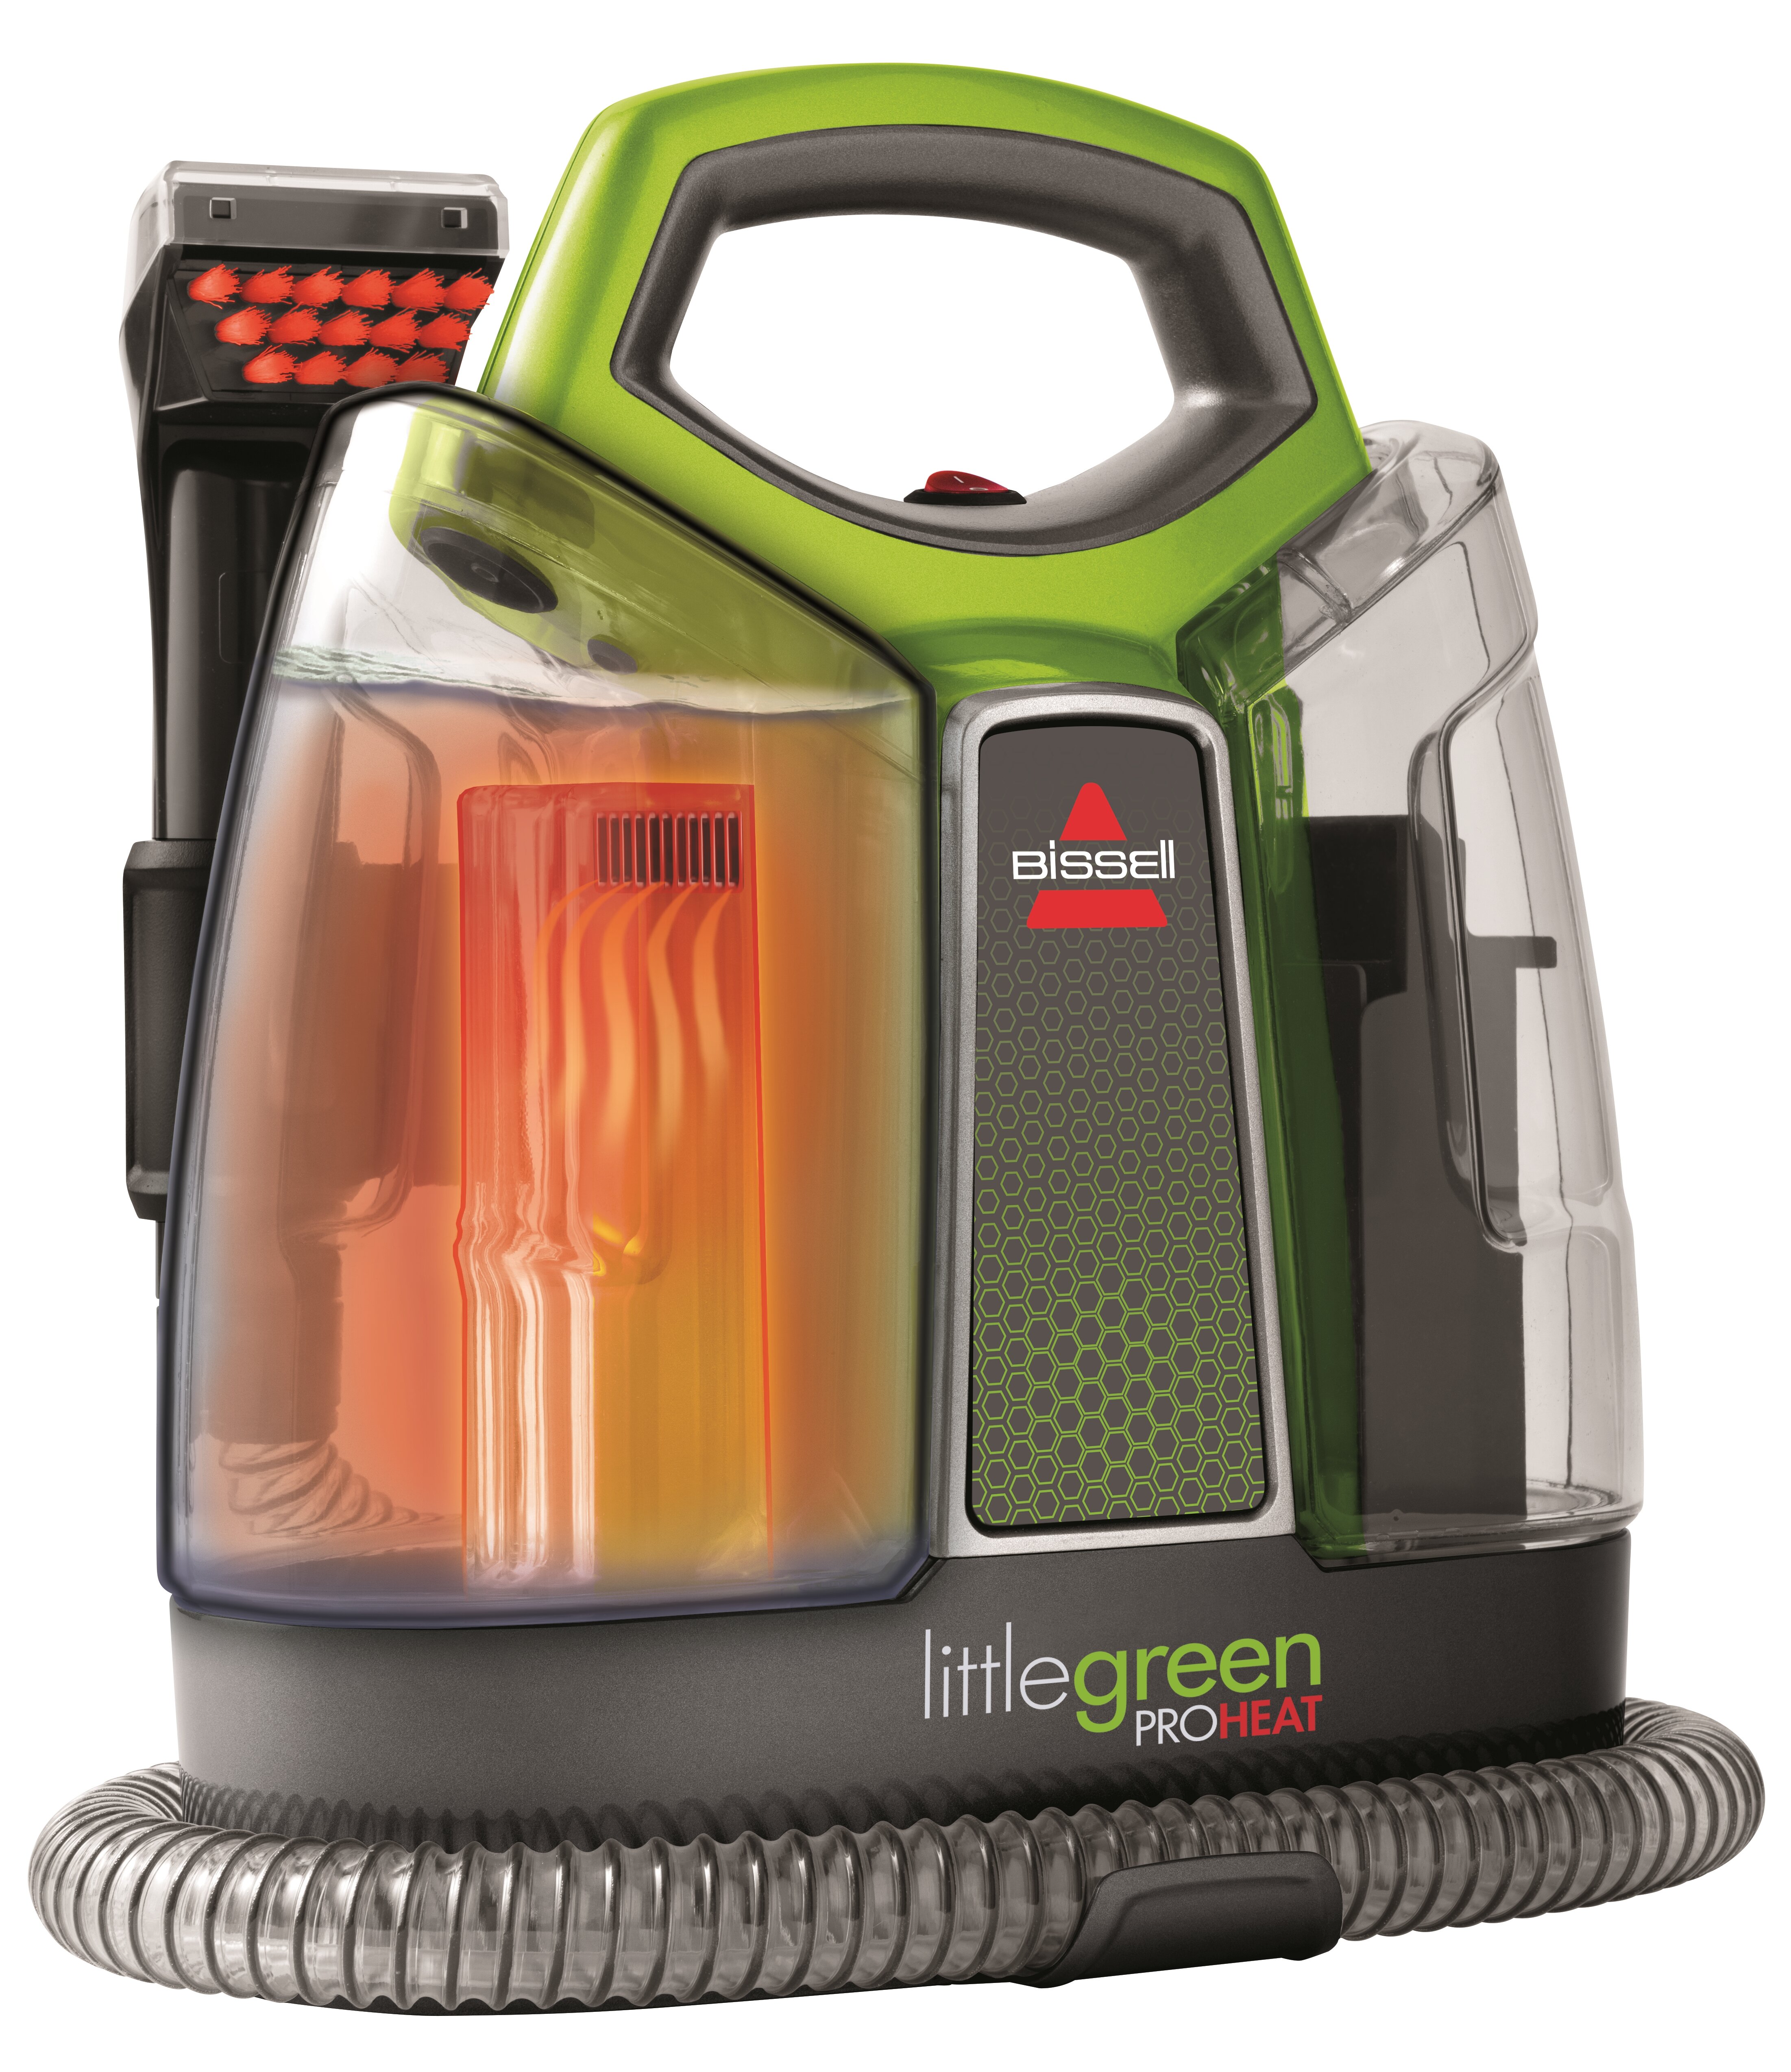 Bissell Little Green ProHeat vs Bissell Little Green COMPARISON 